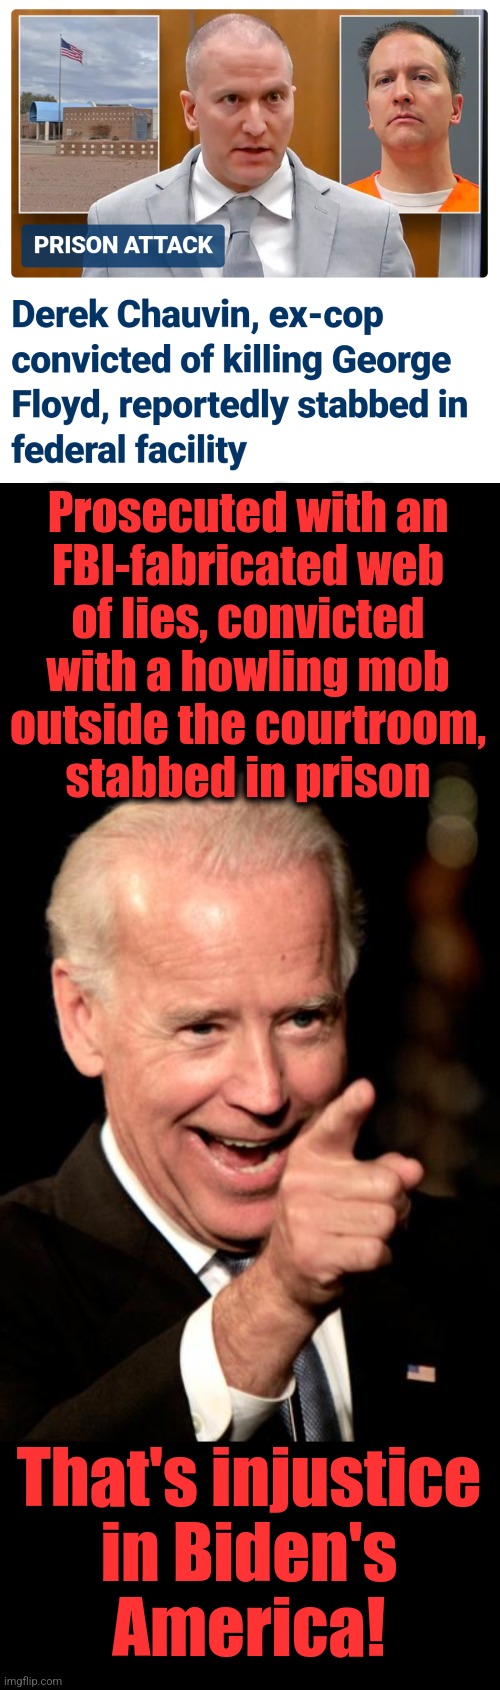 Outrageous! | Prosecuted with an
FBI-fabricated web
of lies, convicted
with a howling mob
outside the courtroom,
stabbed in prison; That's injustice
in Biden's
America! | image tagged in memes,smilin biden,george floyd,derek chauvin,joe biden,lies | made w/ Imgflip meme maker